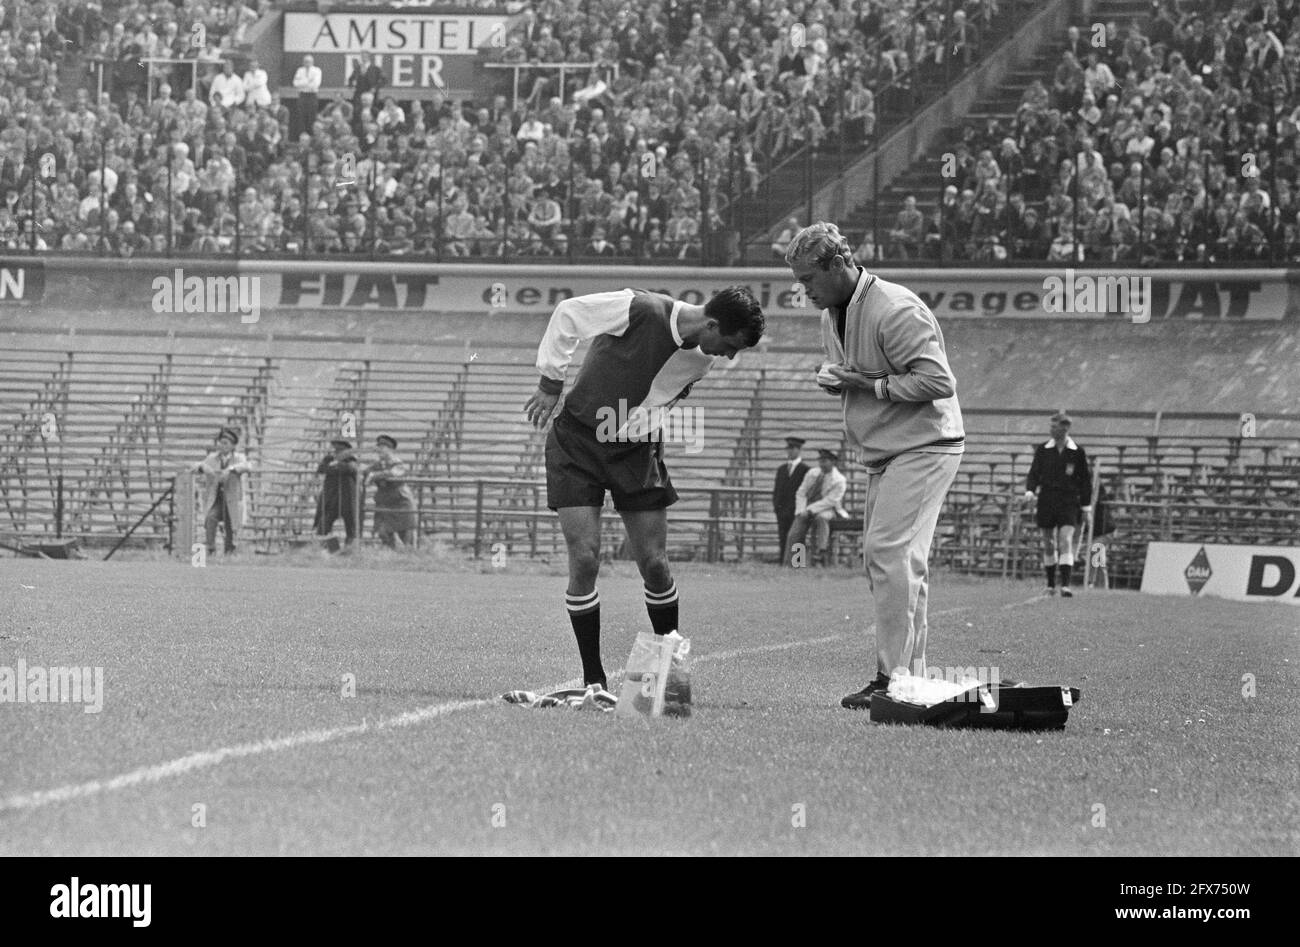 Coen Moulijn injured along the line, 28 August 1966, sport, soccer, The Netherlands, 20th century press agency photo, news to remember, documentary, historic photography 1945-1990, visual stories, human history of the Twentieth Century, capturing moments in time Stock Photo